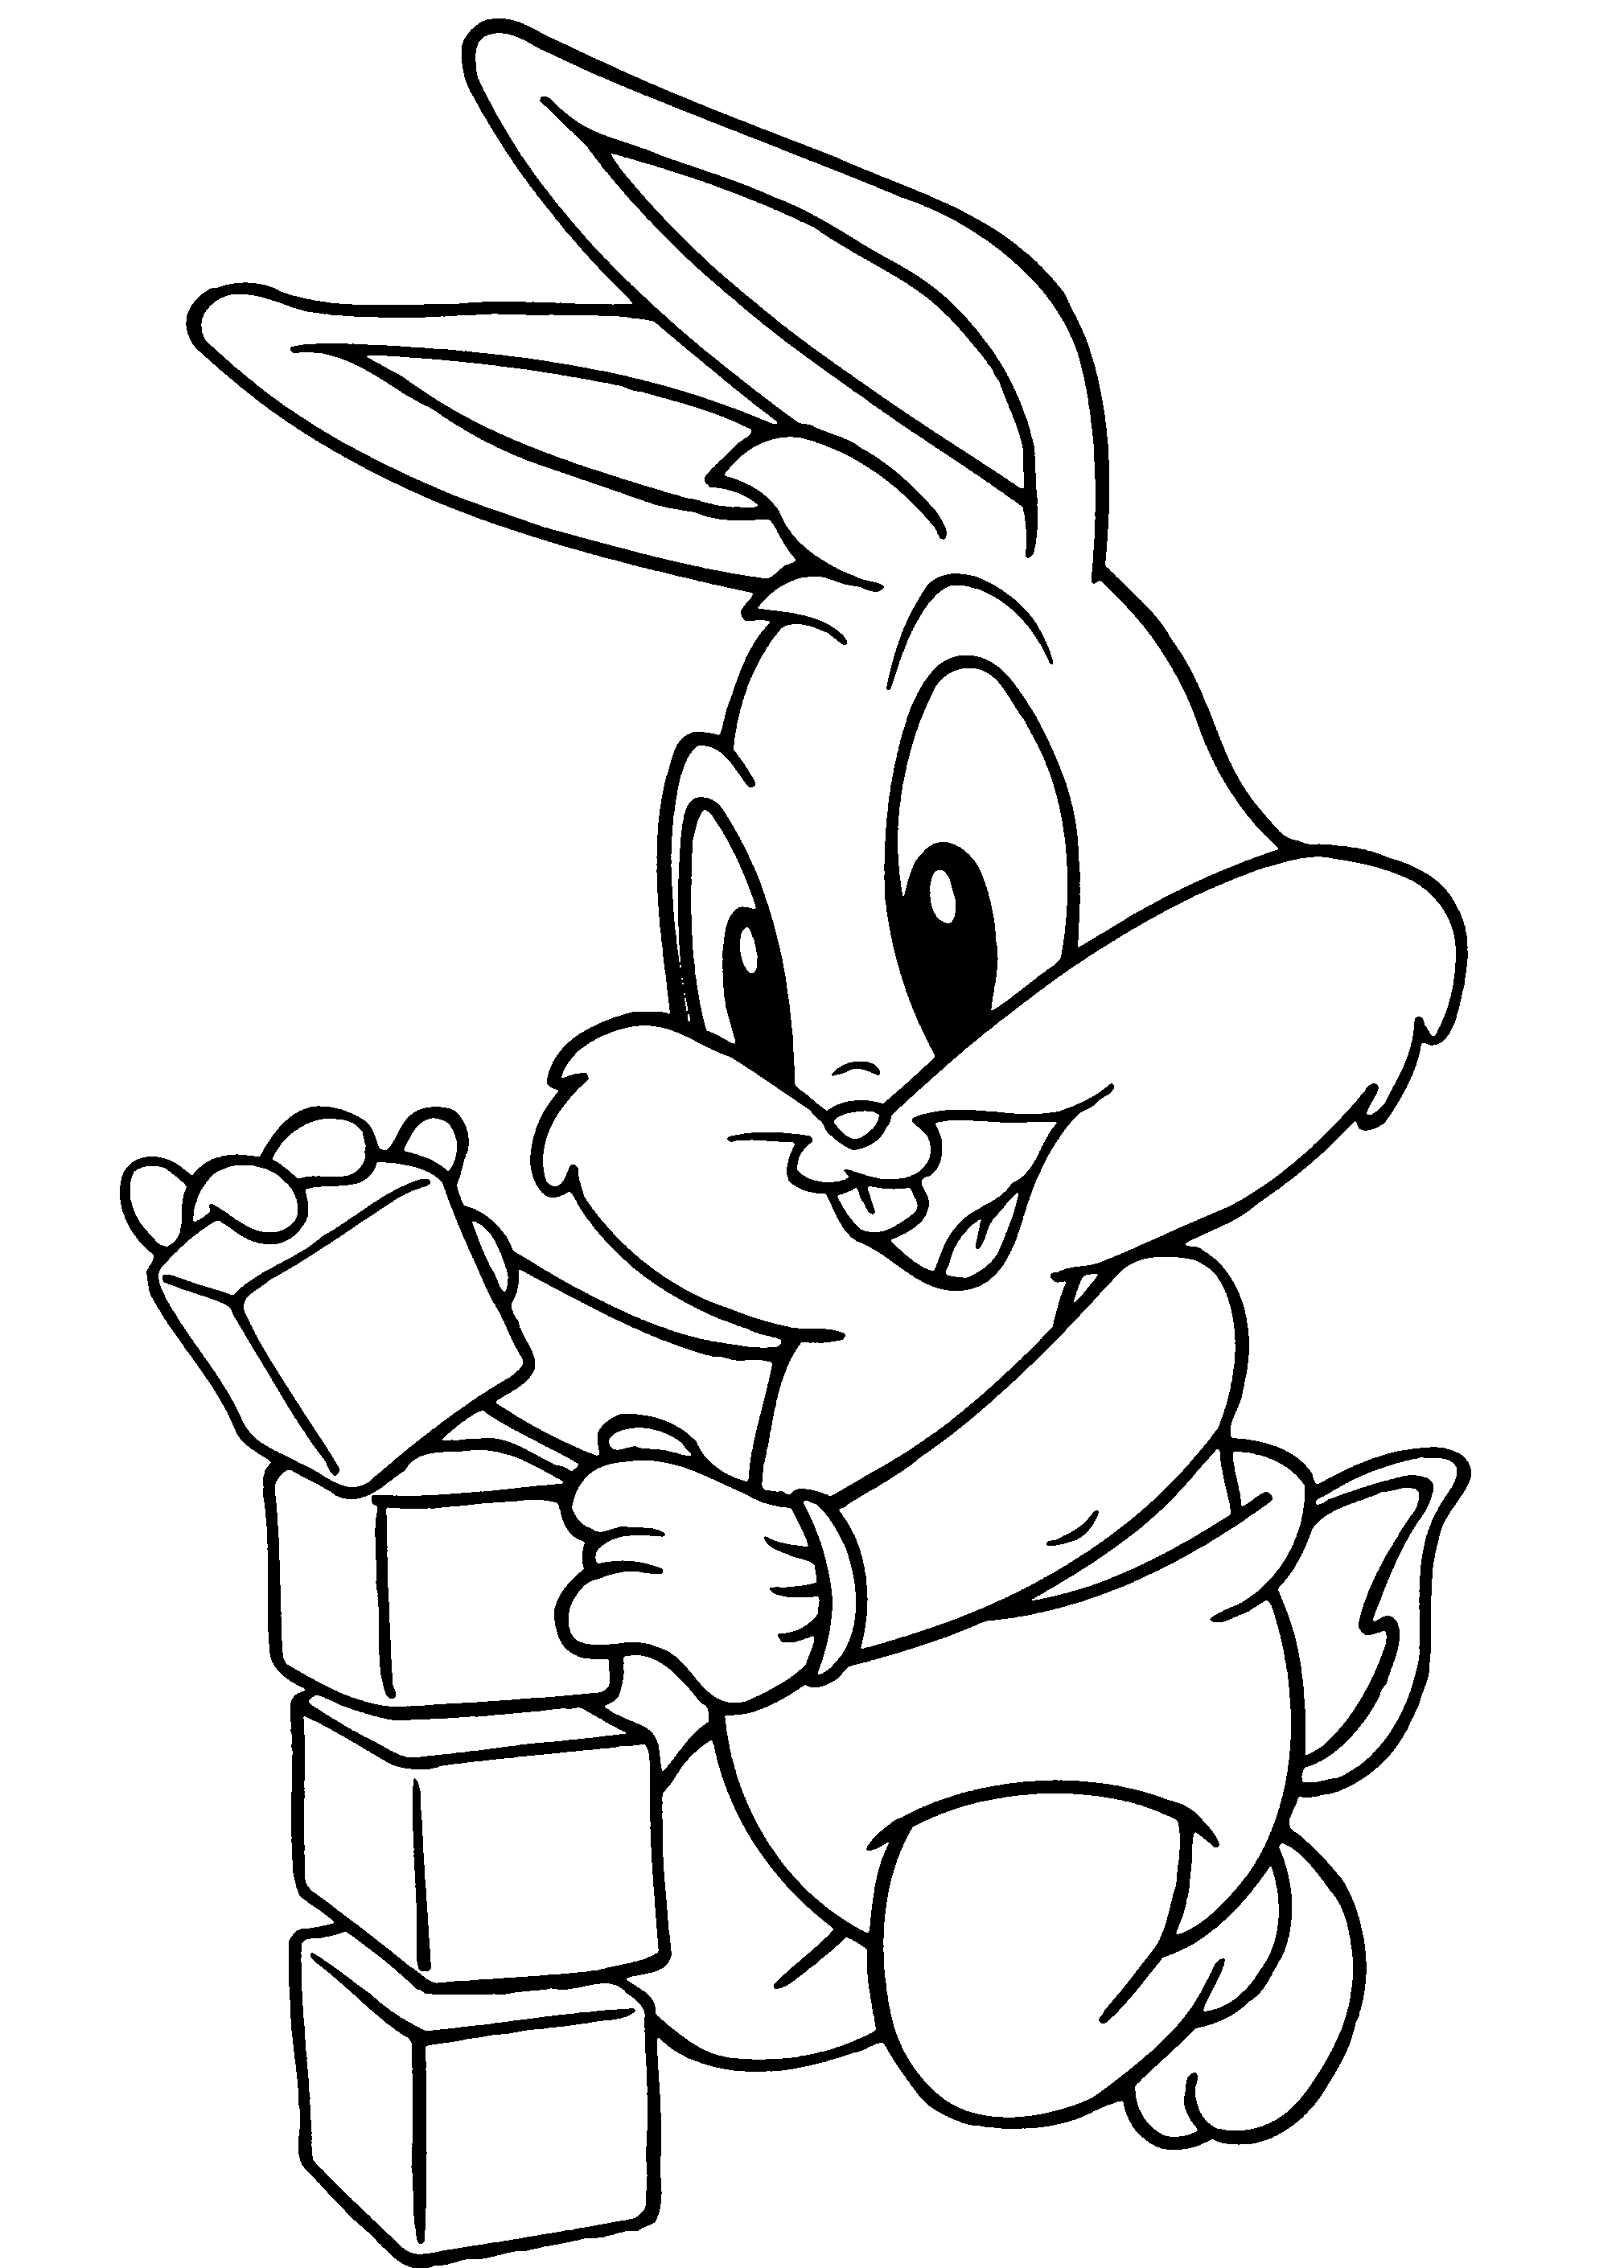 Bunny Baby Looney Tunes| Coloring Pages for Kids | Cartoon Coloring